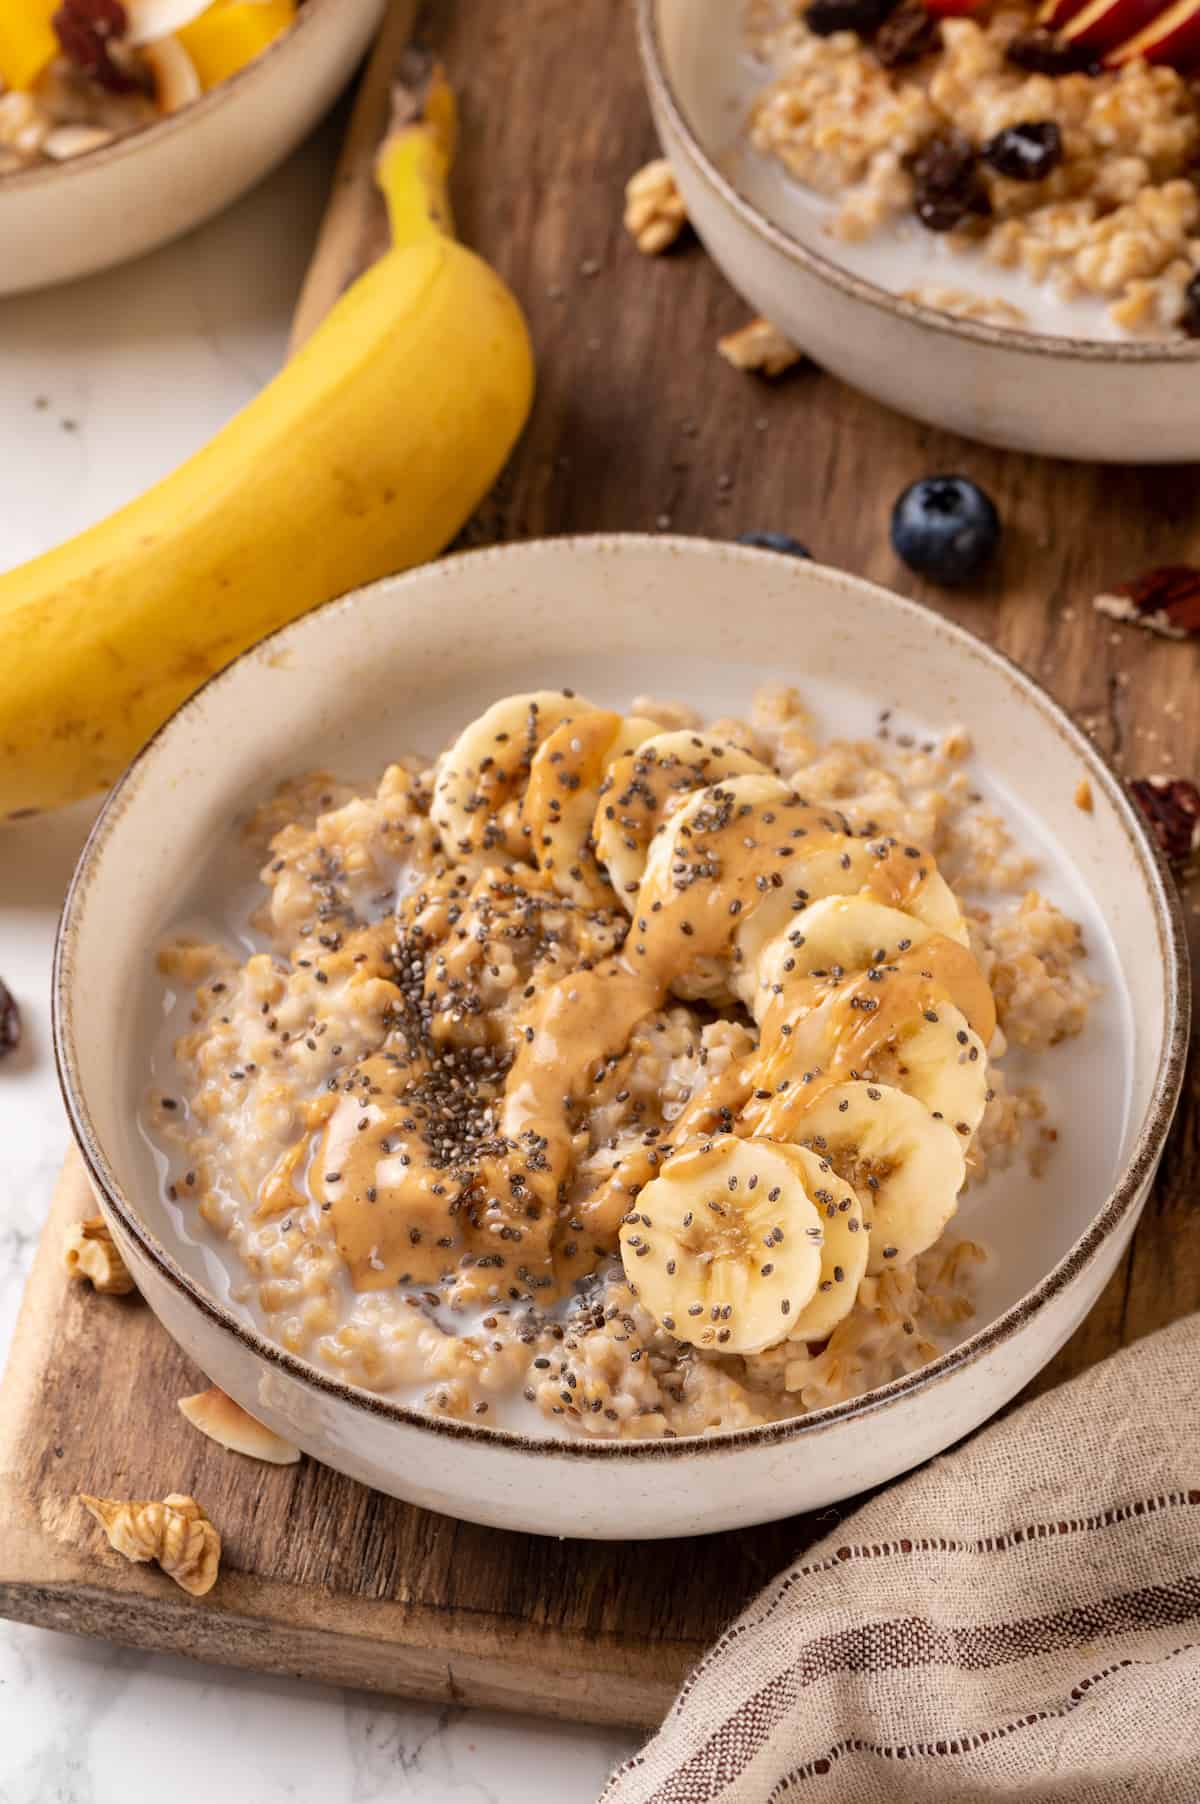 Bowl of Instant Pot steel-cut oats topped with banana, peanut butter, and chia seeds